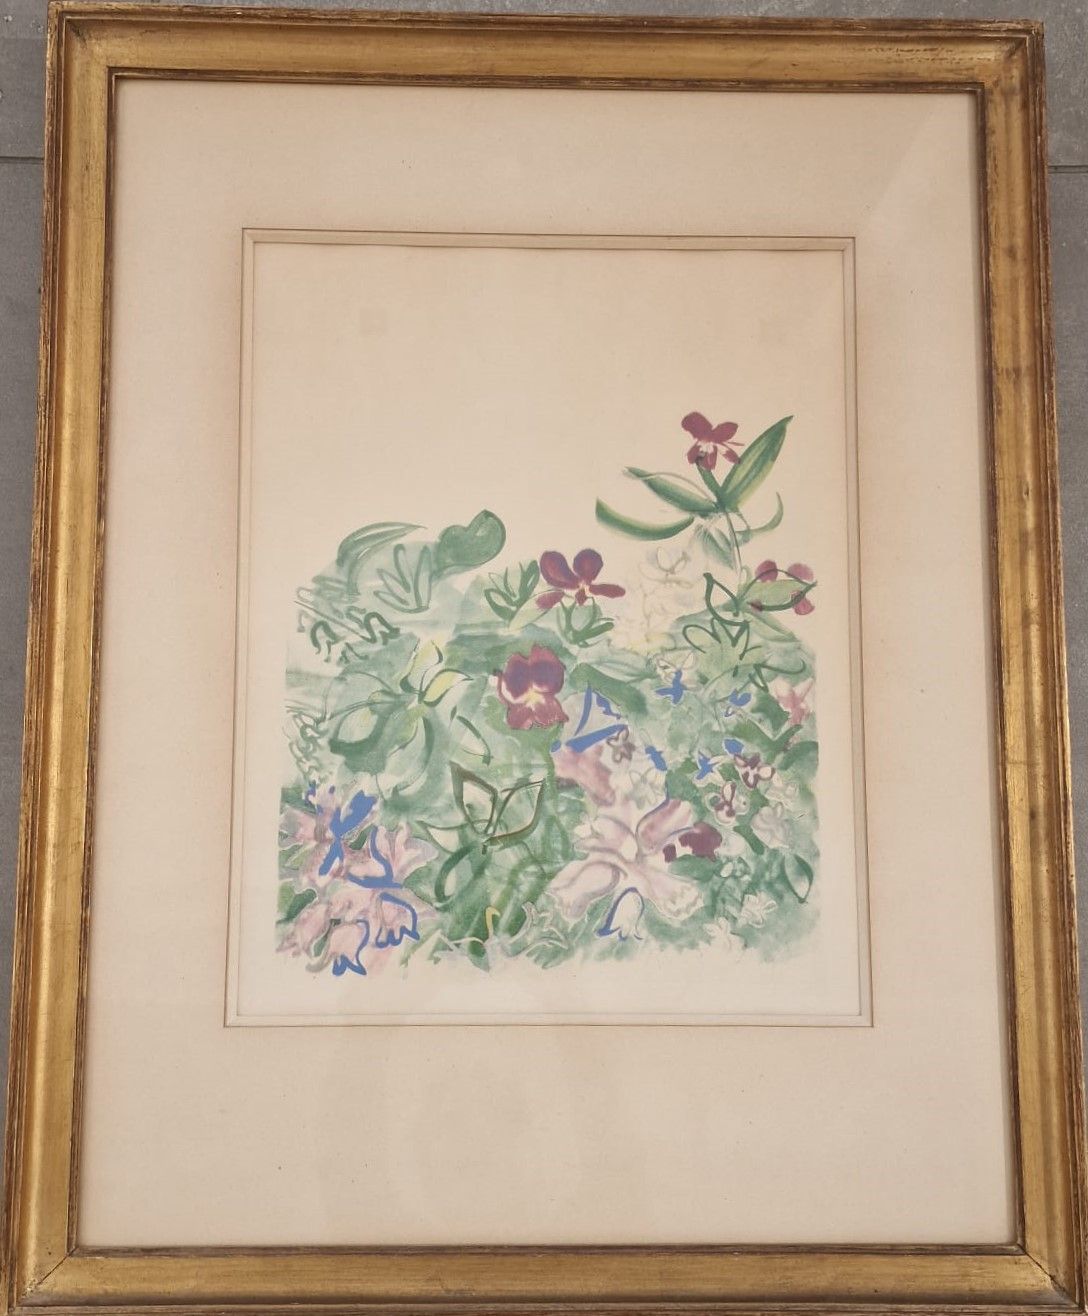 Null Raoul DUFY (1877-1953)

Flowers

Lithograph

Signed lower right

38 x 30 cm